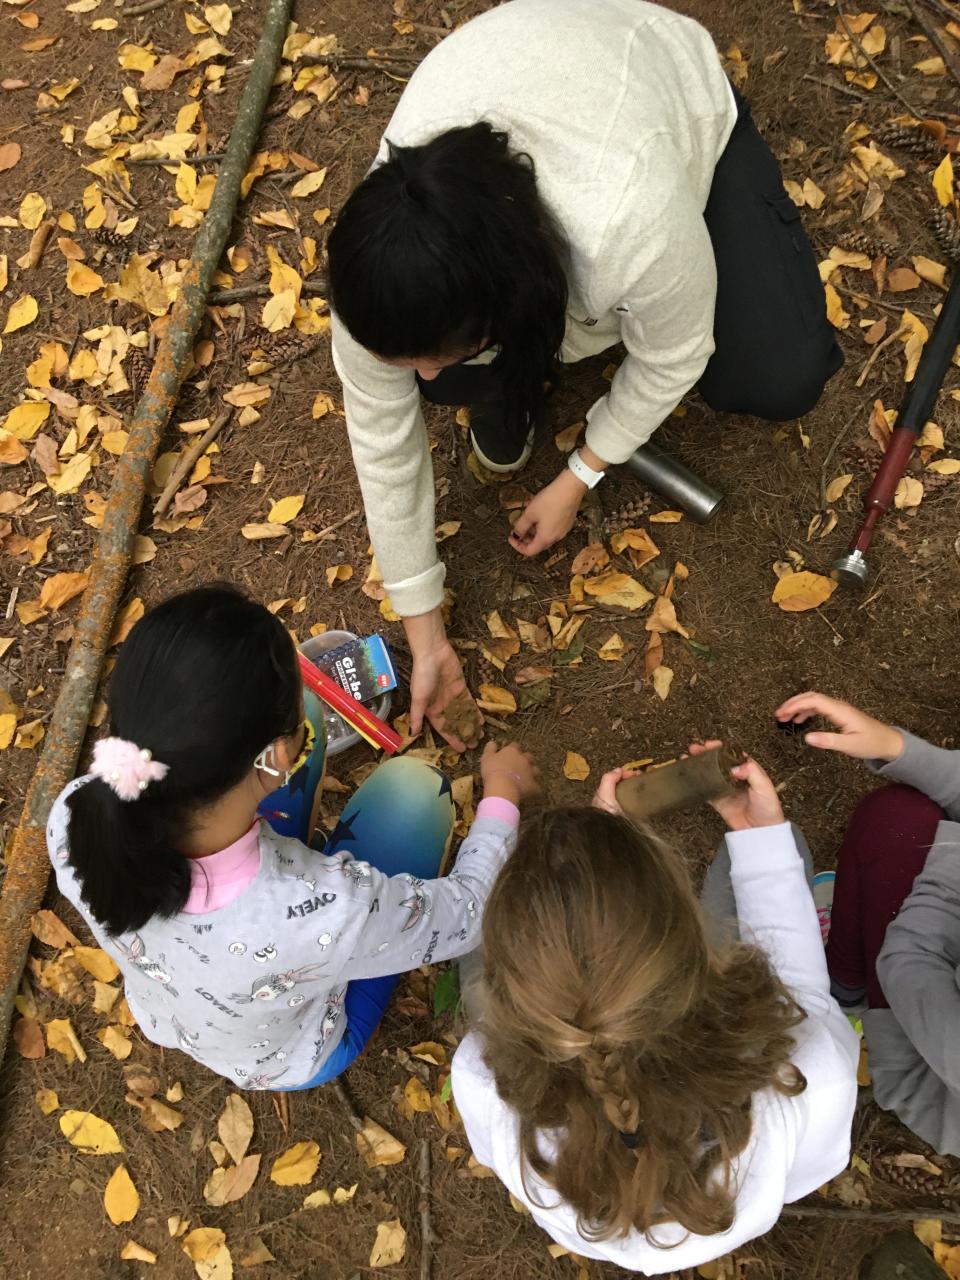 Students from Moharimet Elementary School and Mast Way Elementary School used rulers, magnifying glasses, soil color books, a microscope, and were even able to try out augers, shovels and soil corers to dig their own soil samples.